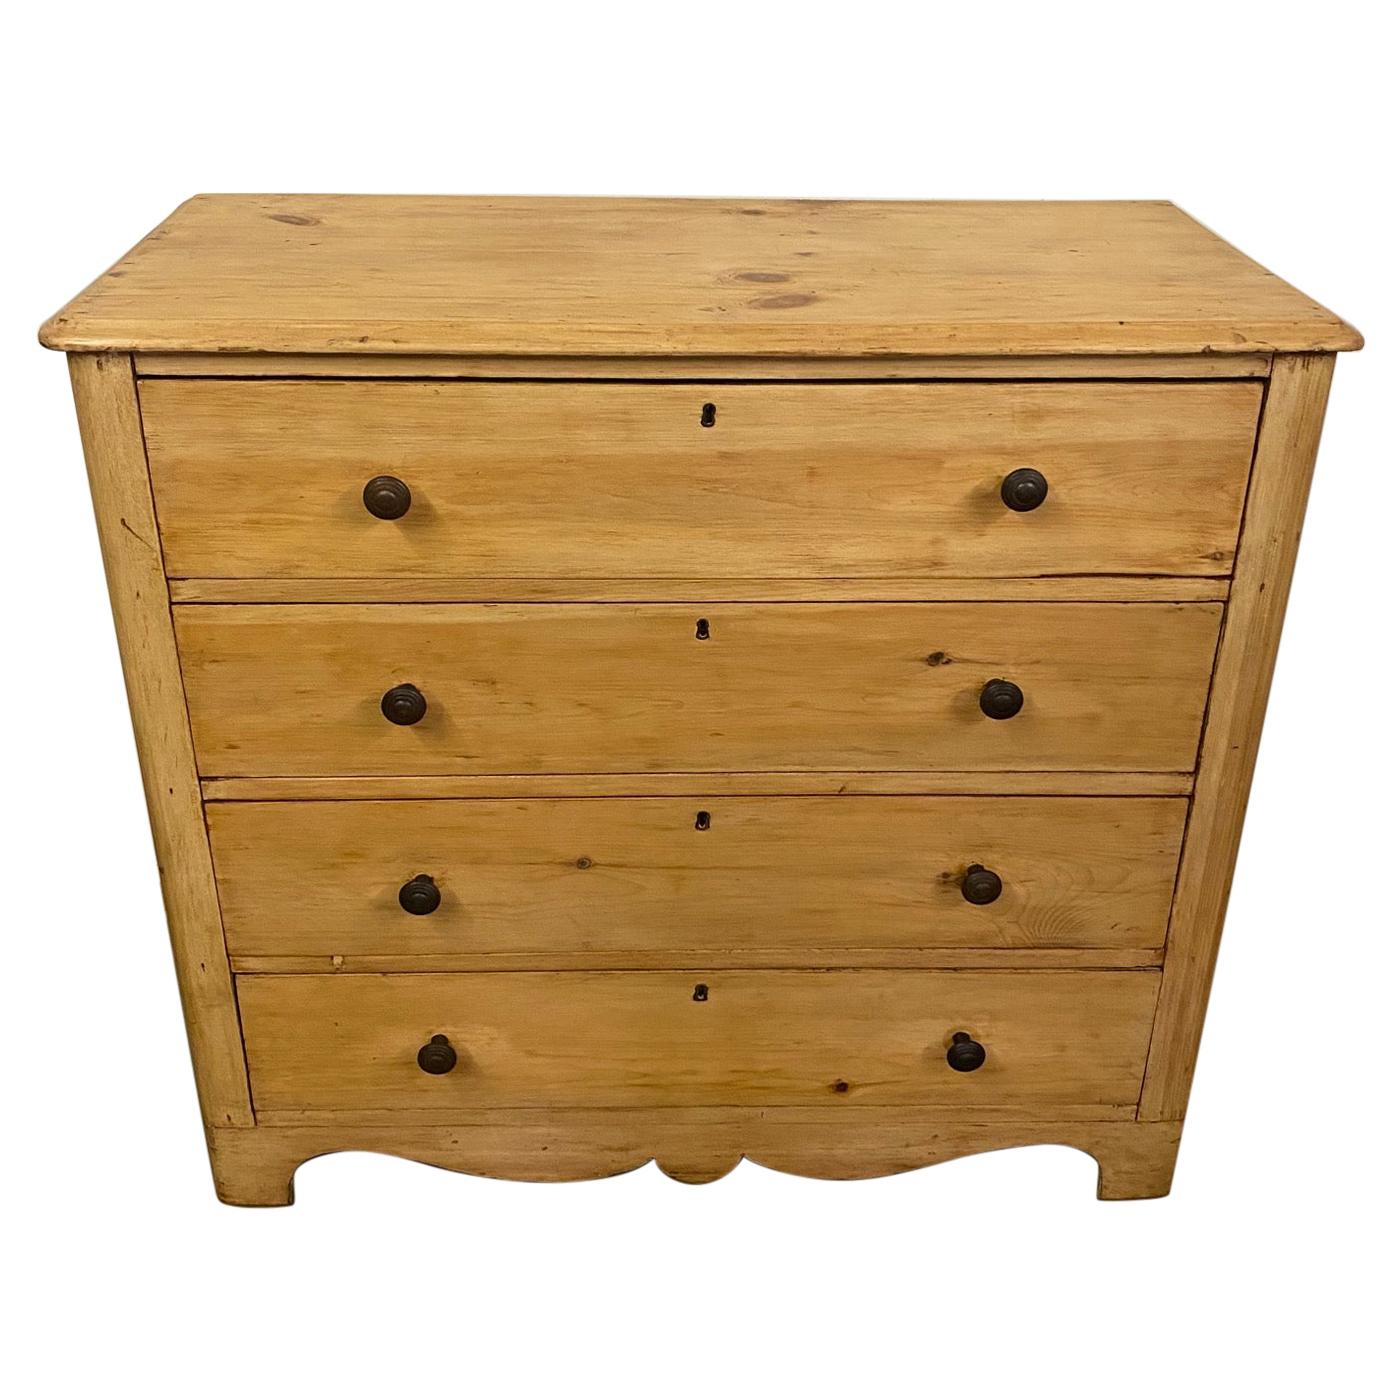 19th Century Regency Style Pine Chest of Drawers